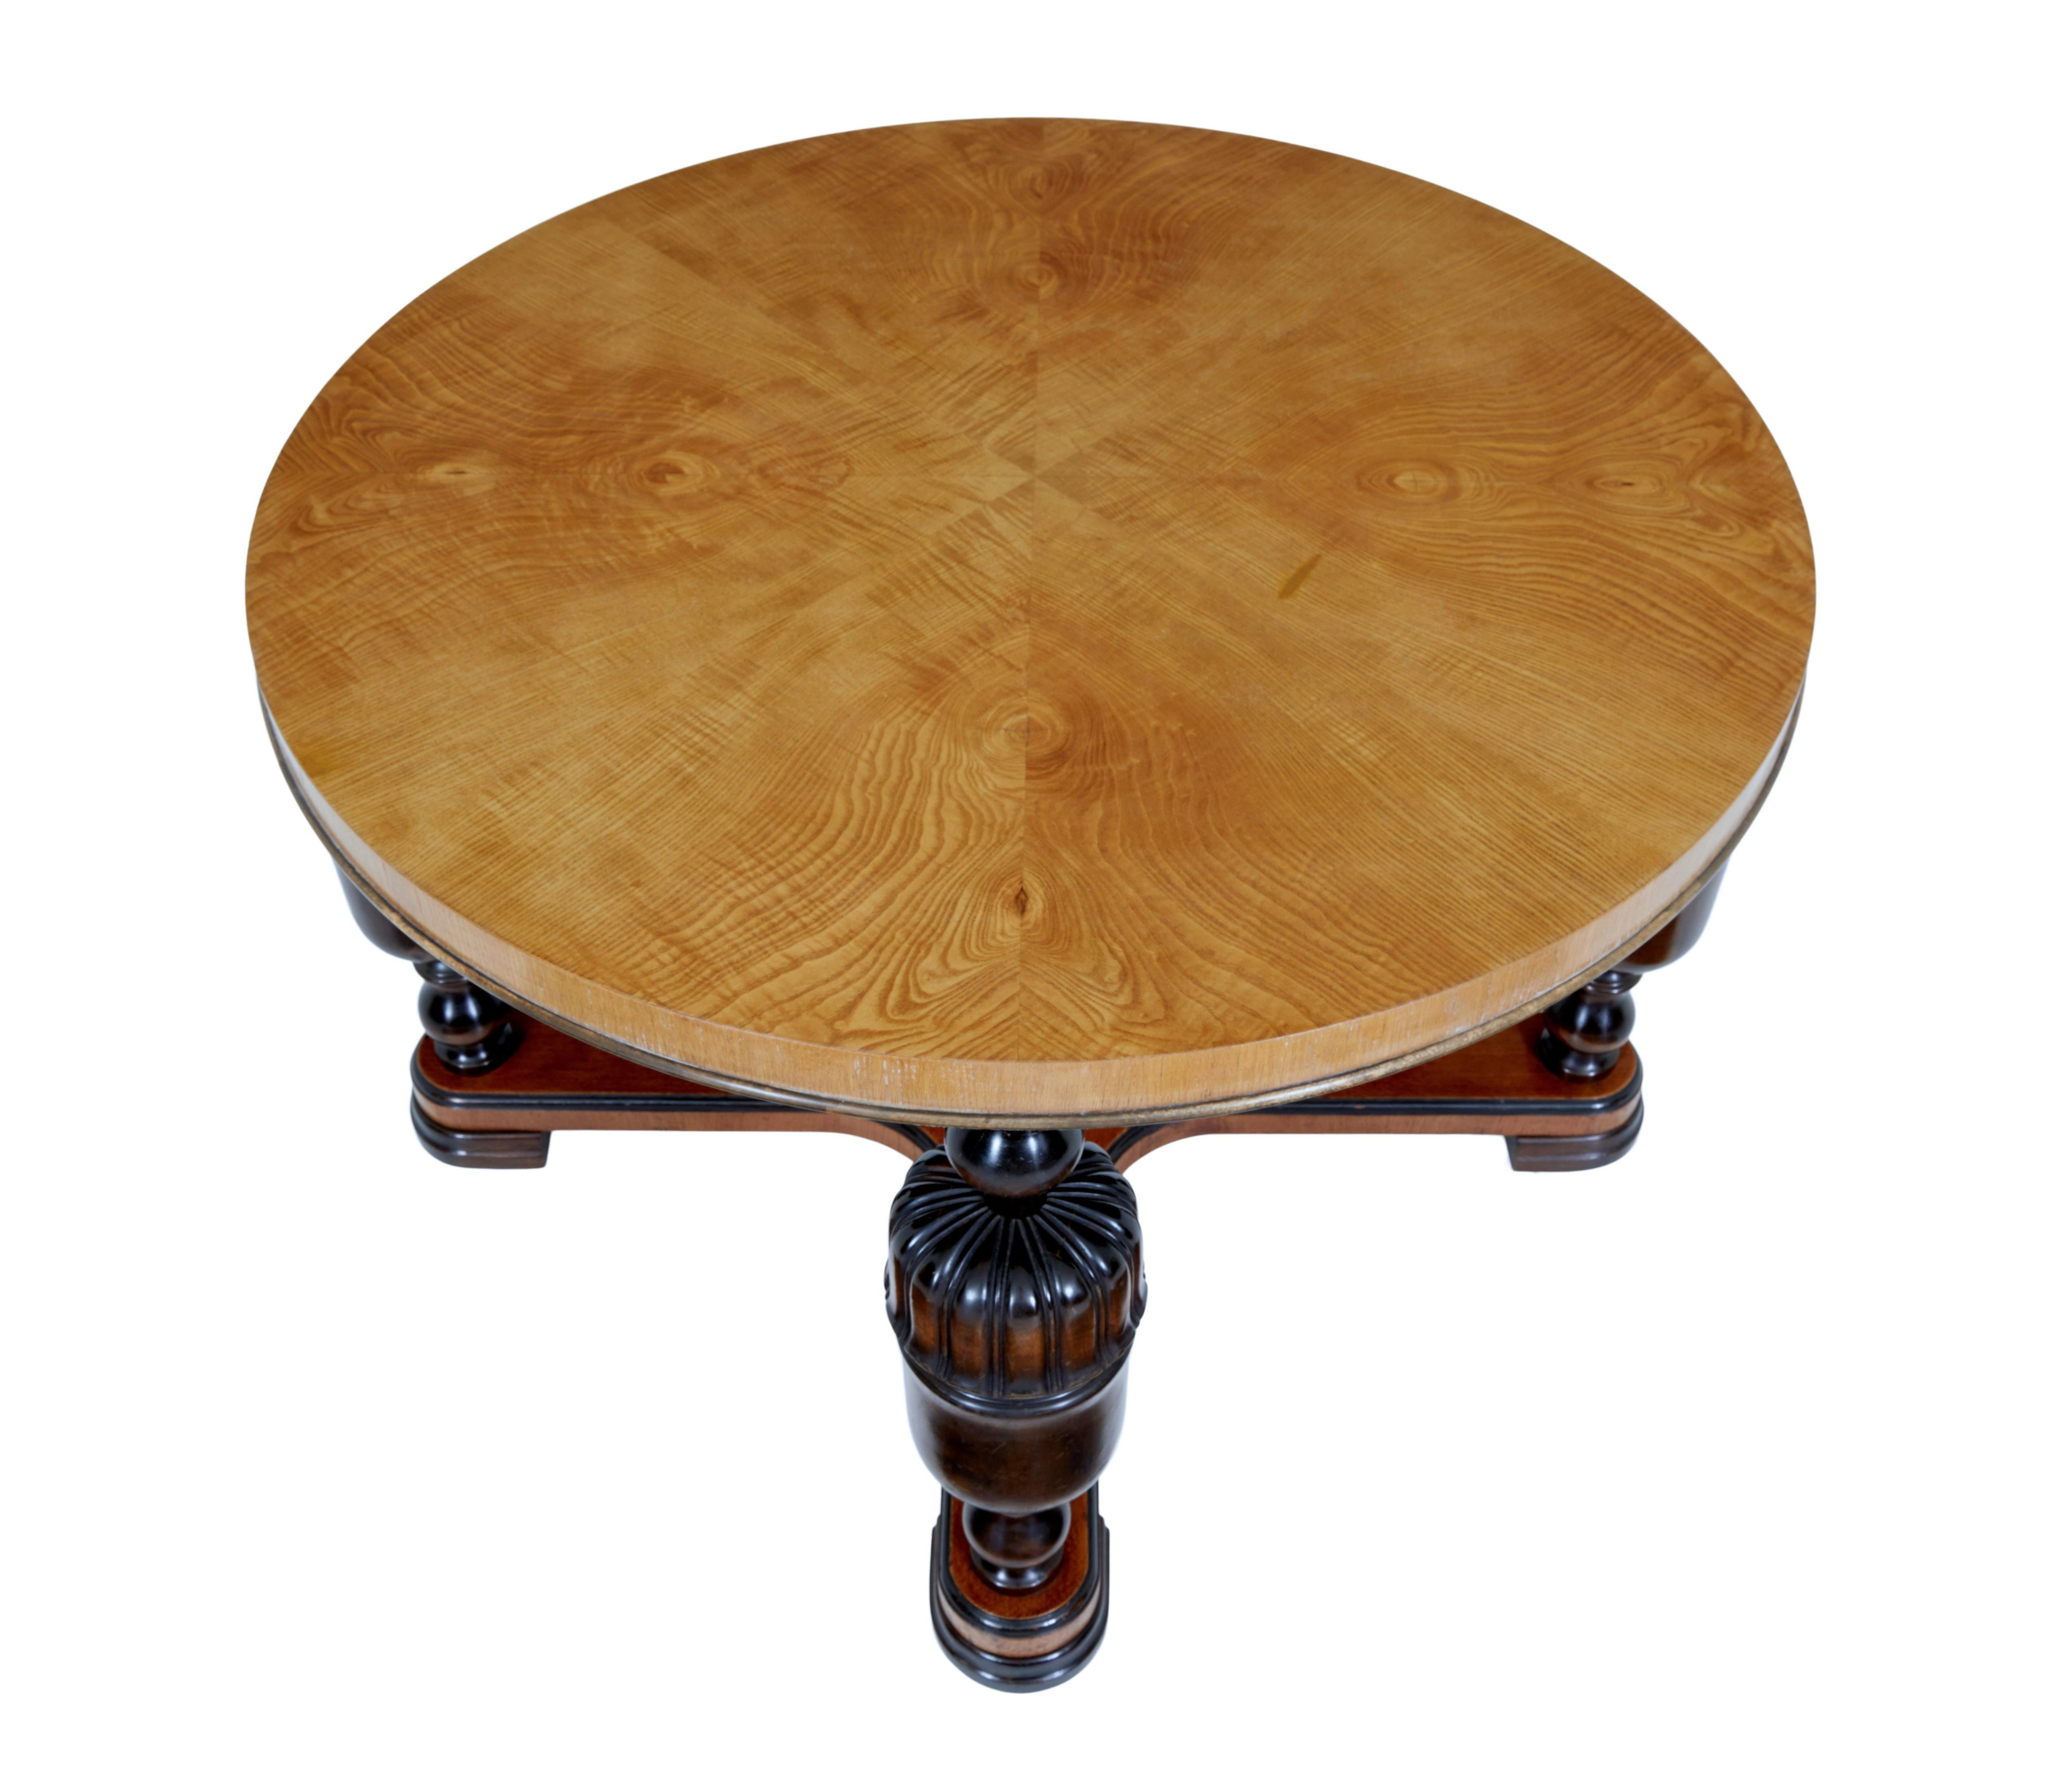 20th century Art Deco birch and elm coffee table, circa 1930.

Circular table top with matched elm veneers. Thick top is supported by 4 turned and fluted baluster legs united by an x-frame stretcher. Standing on ebonized flat hoof feet.

Minor